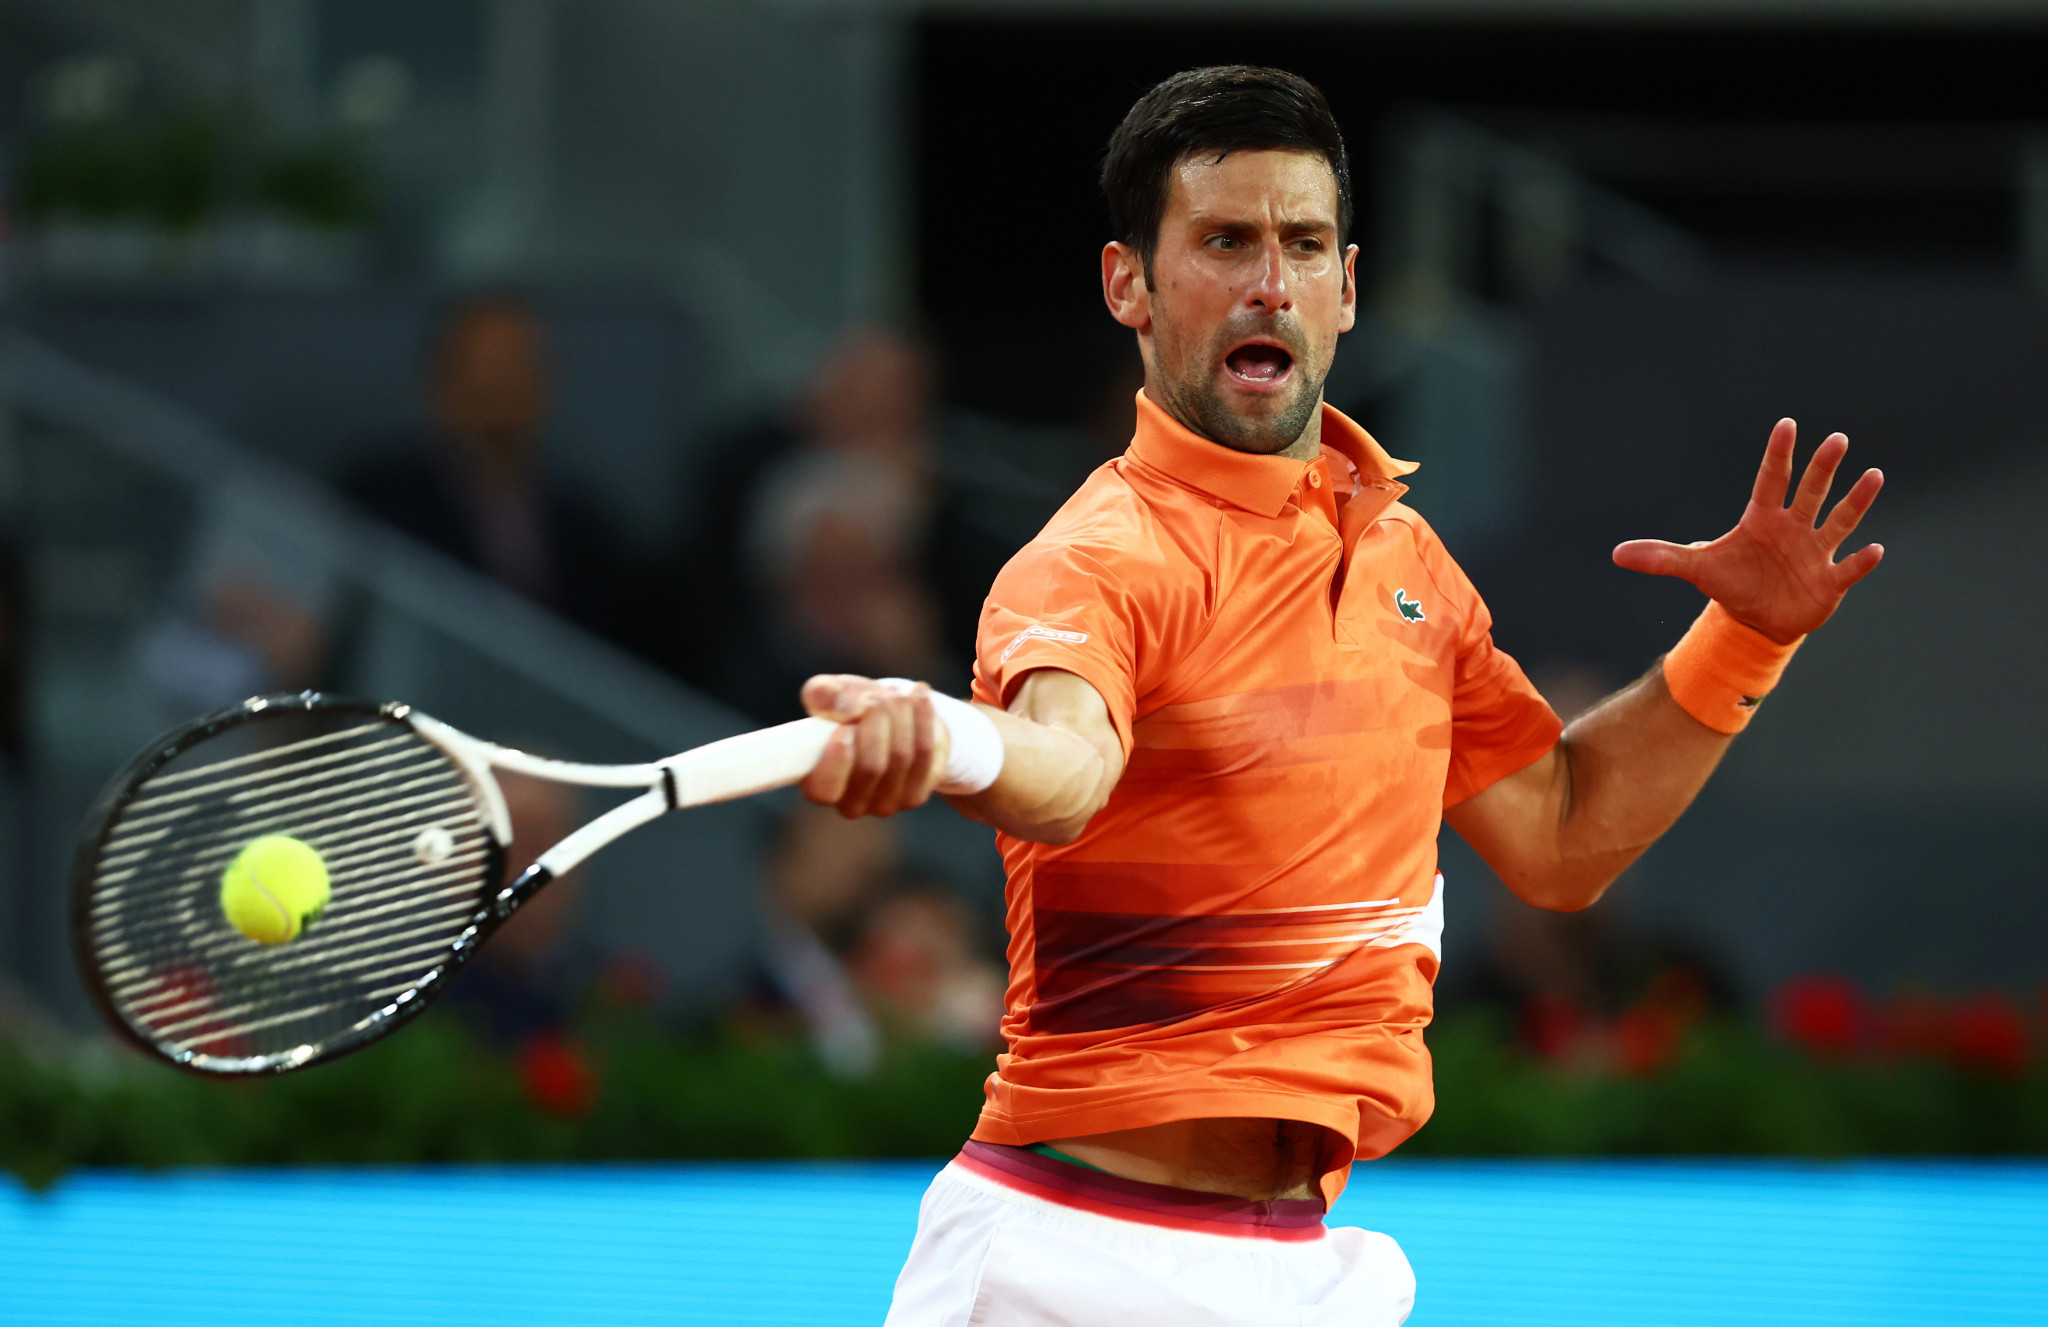 Men's top seed Novak Djokovic extended his winning record against Gael Monfils to 18-0 at the Madrid Open ©Getty Images